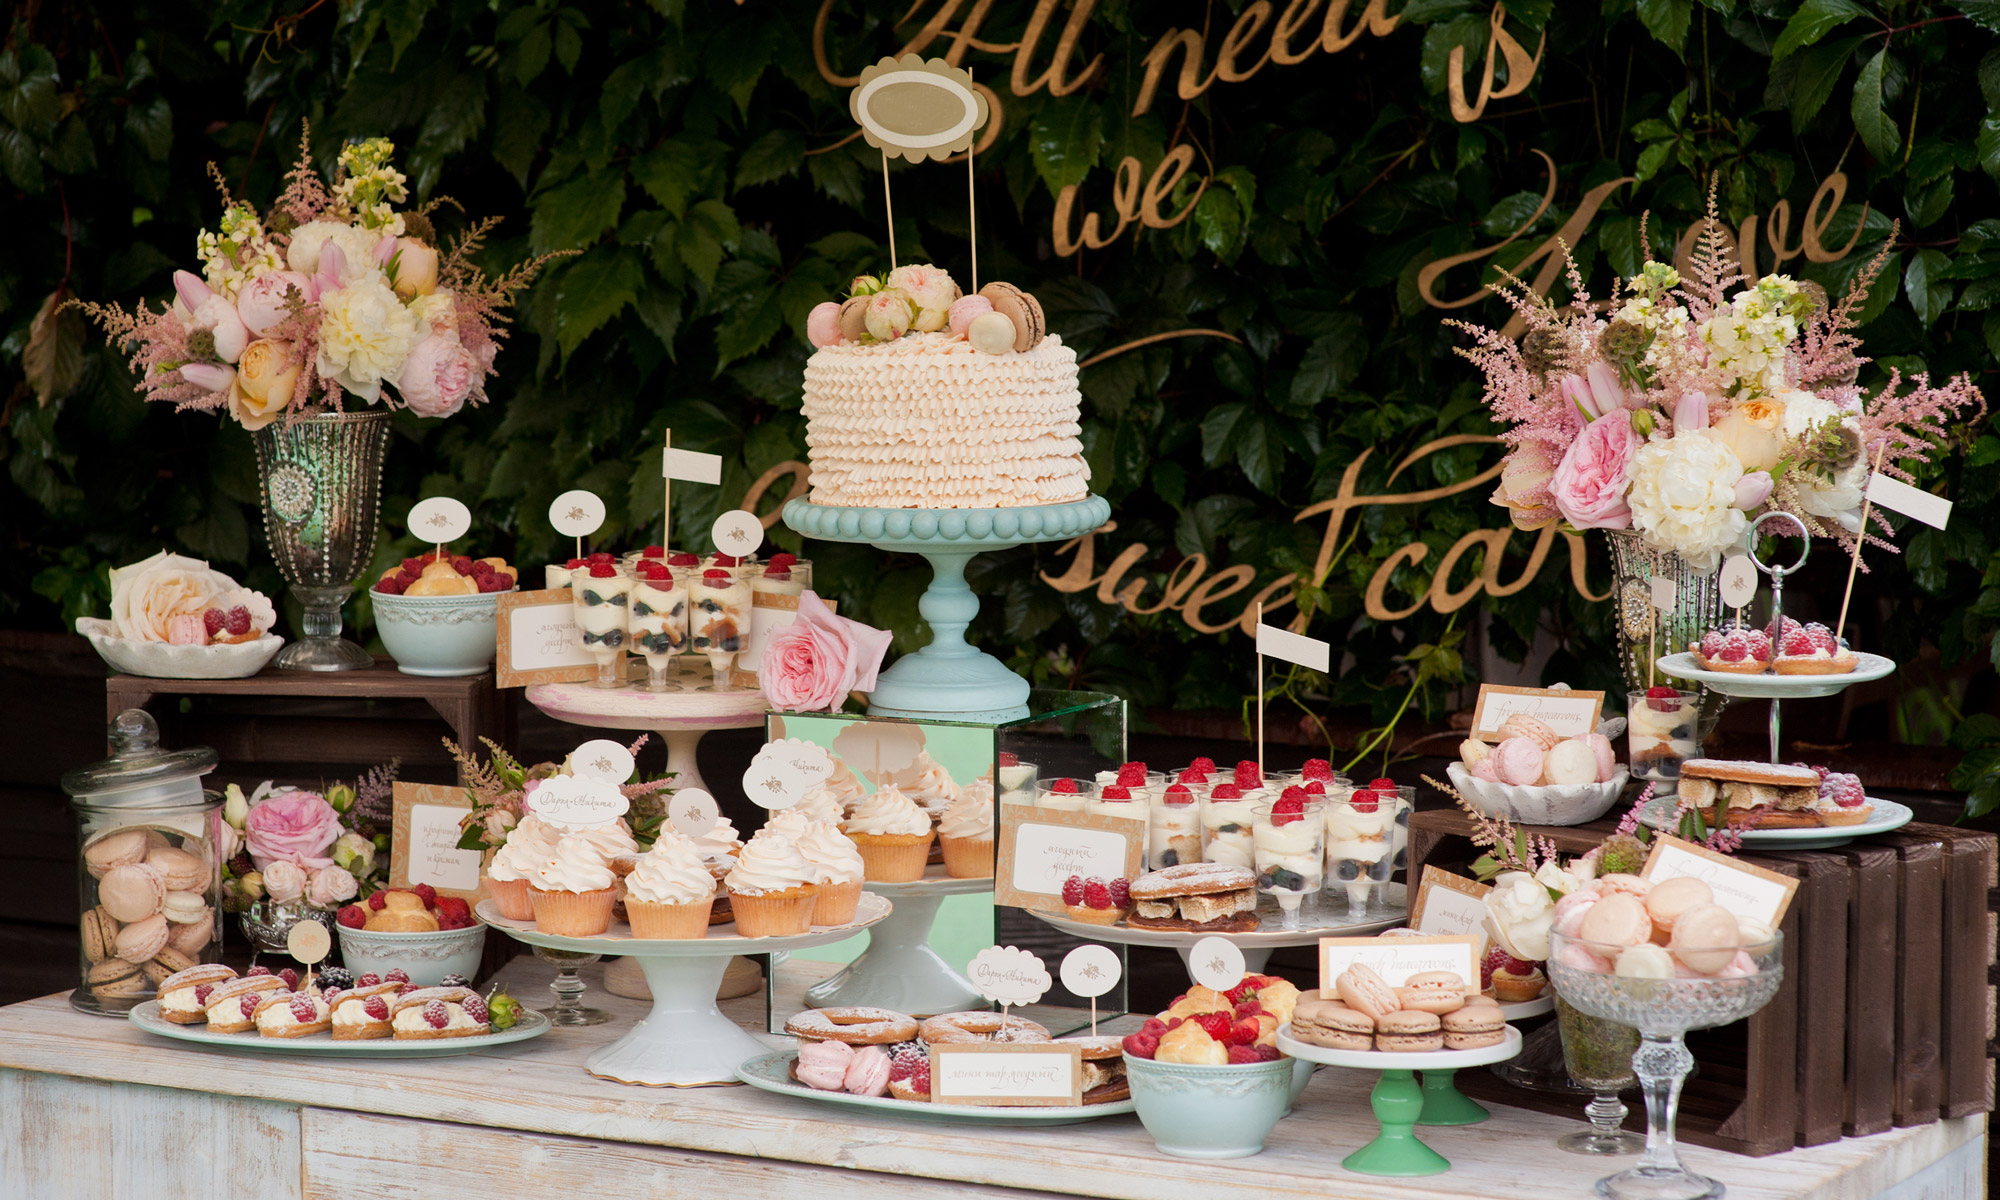 Wedding Cupcakes to Perfectly Match Your Décor